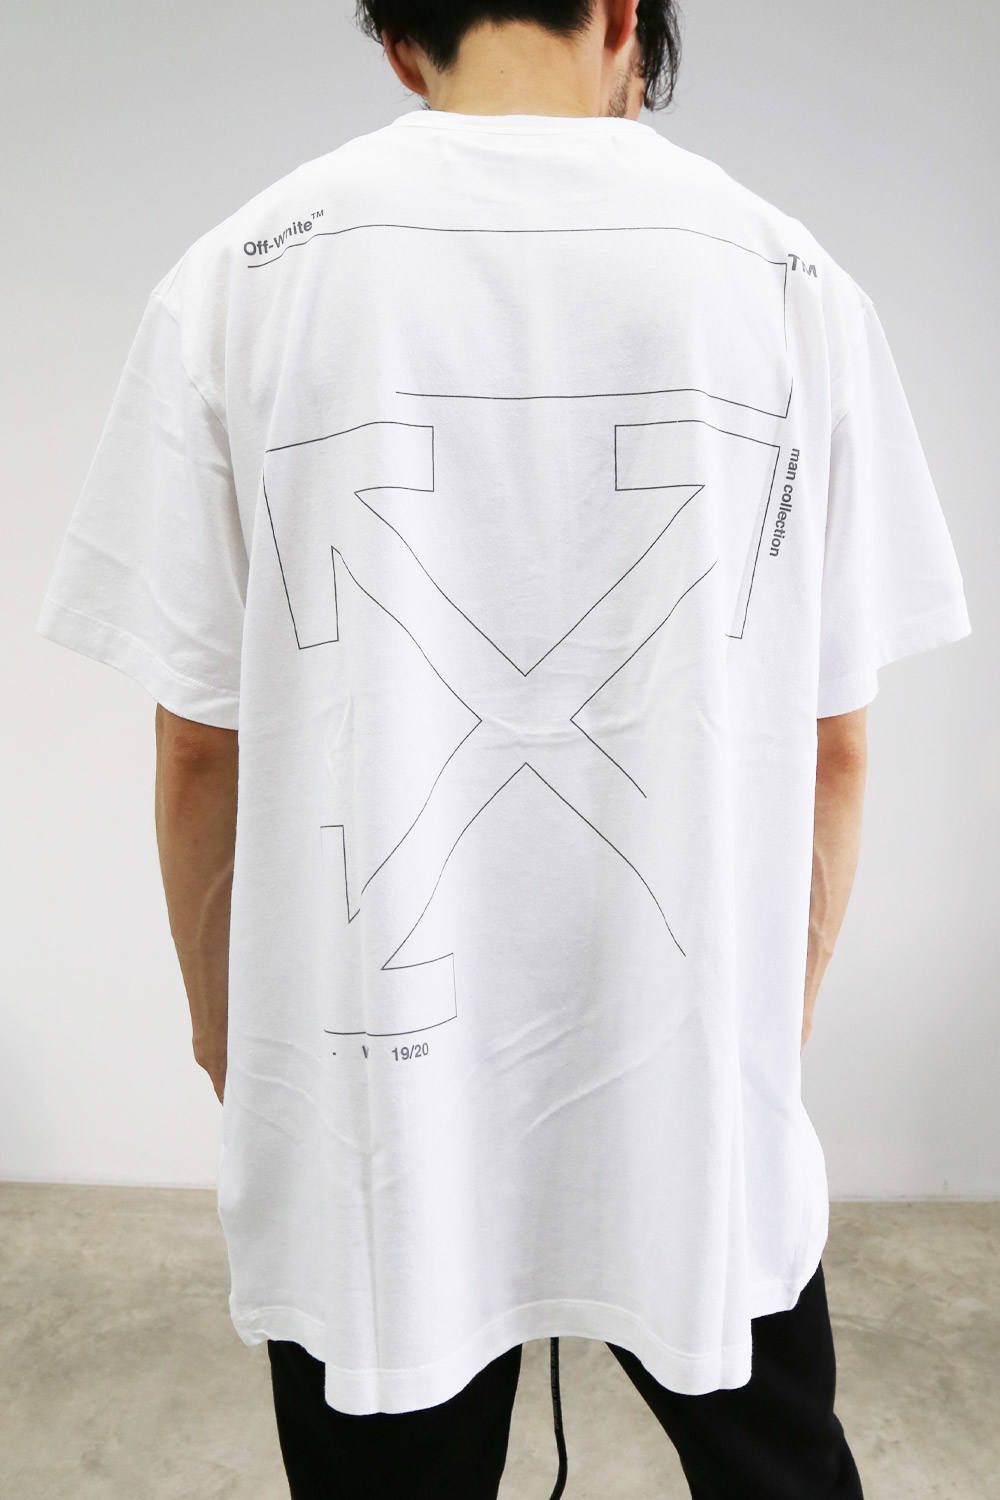 Off-White オフホワイト アロー UNFINISHED Tシャツ 半袖-